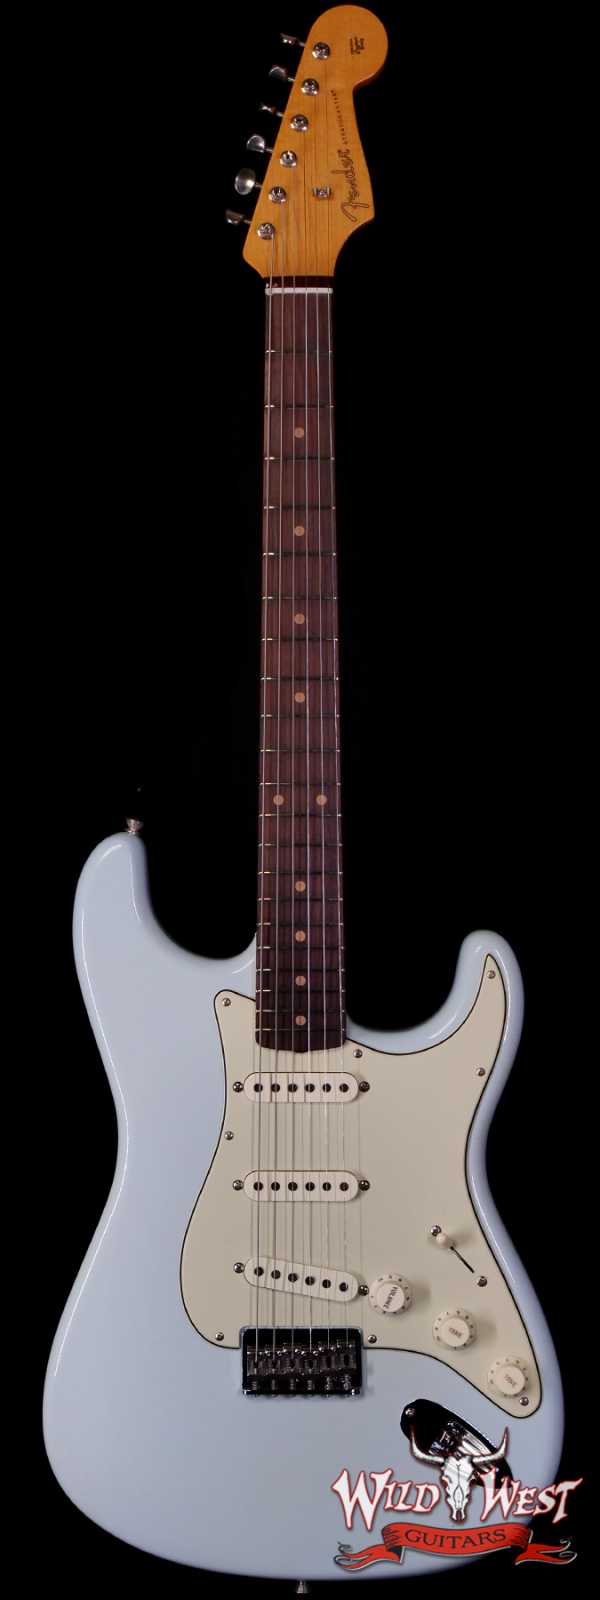 Fender Custom Shop Vintage Custom ‘59 1959 Hardtail Stratocaster Time Capsule Package Faded Aged Sonic Blue 7.25 LBS